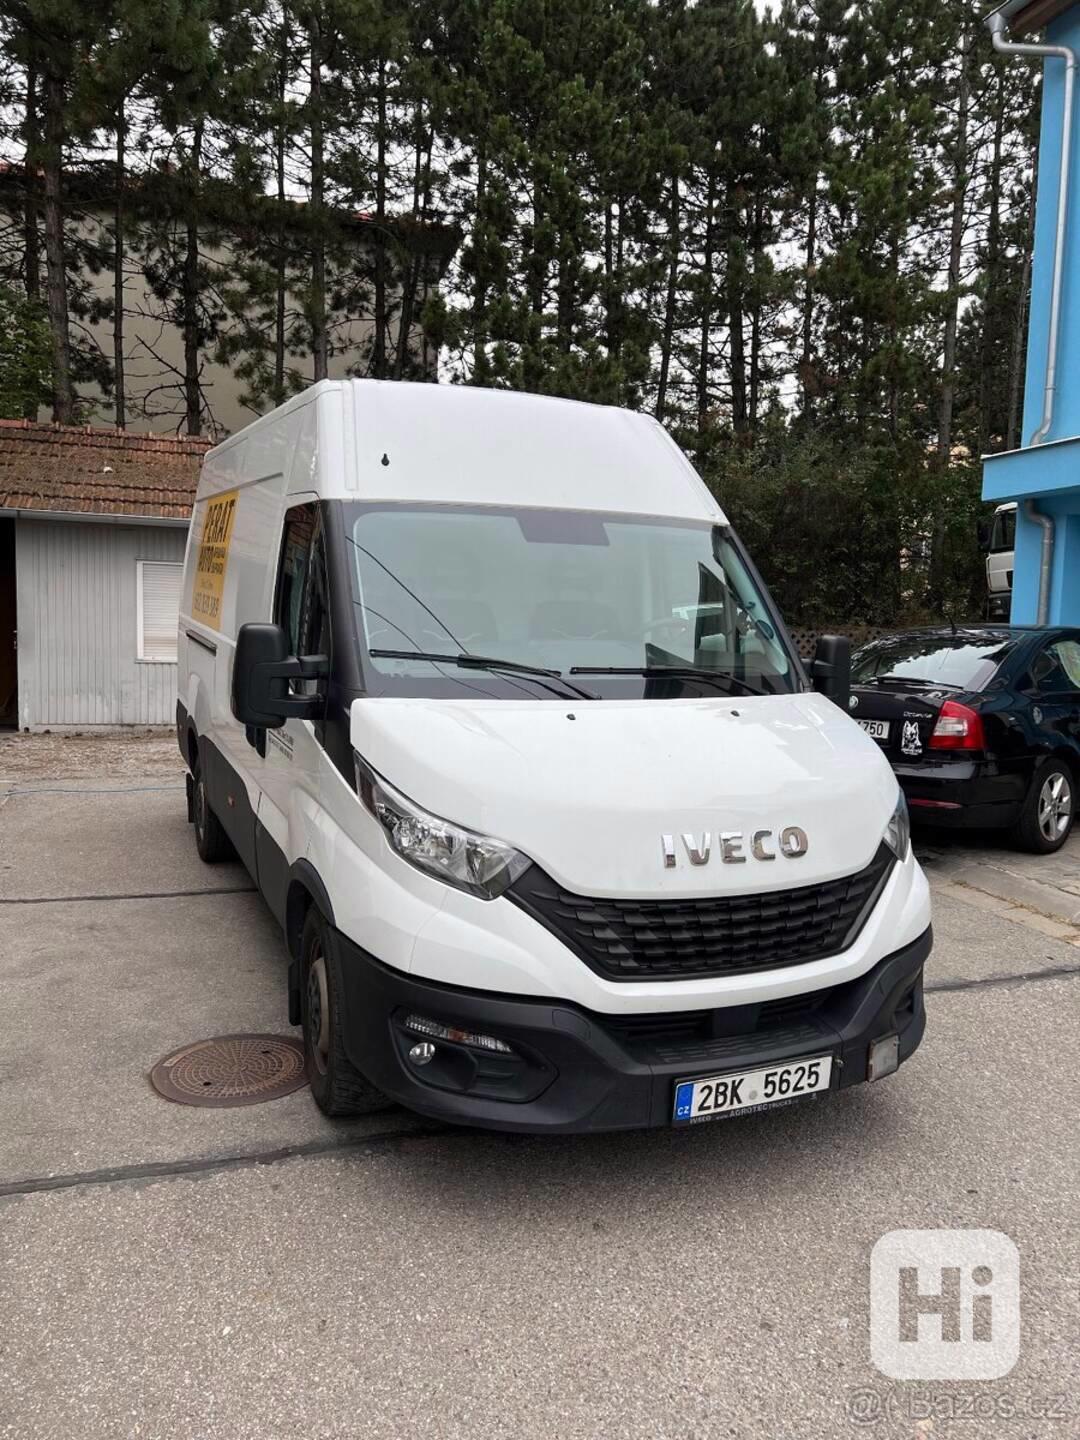 Iveco Daily 3,0 (132kw) - foto 1